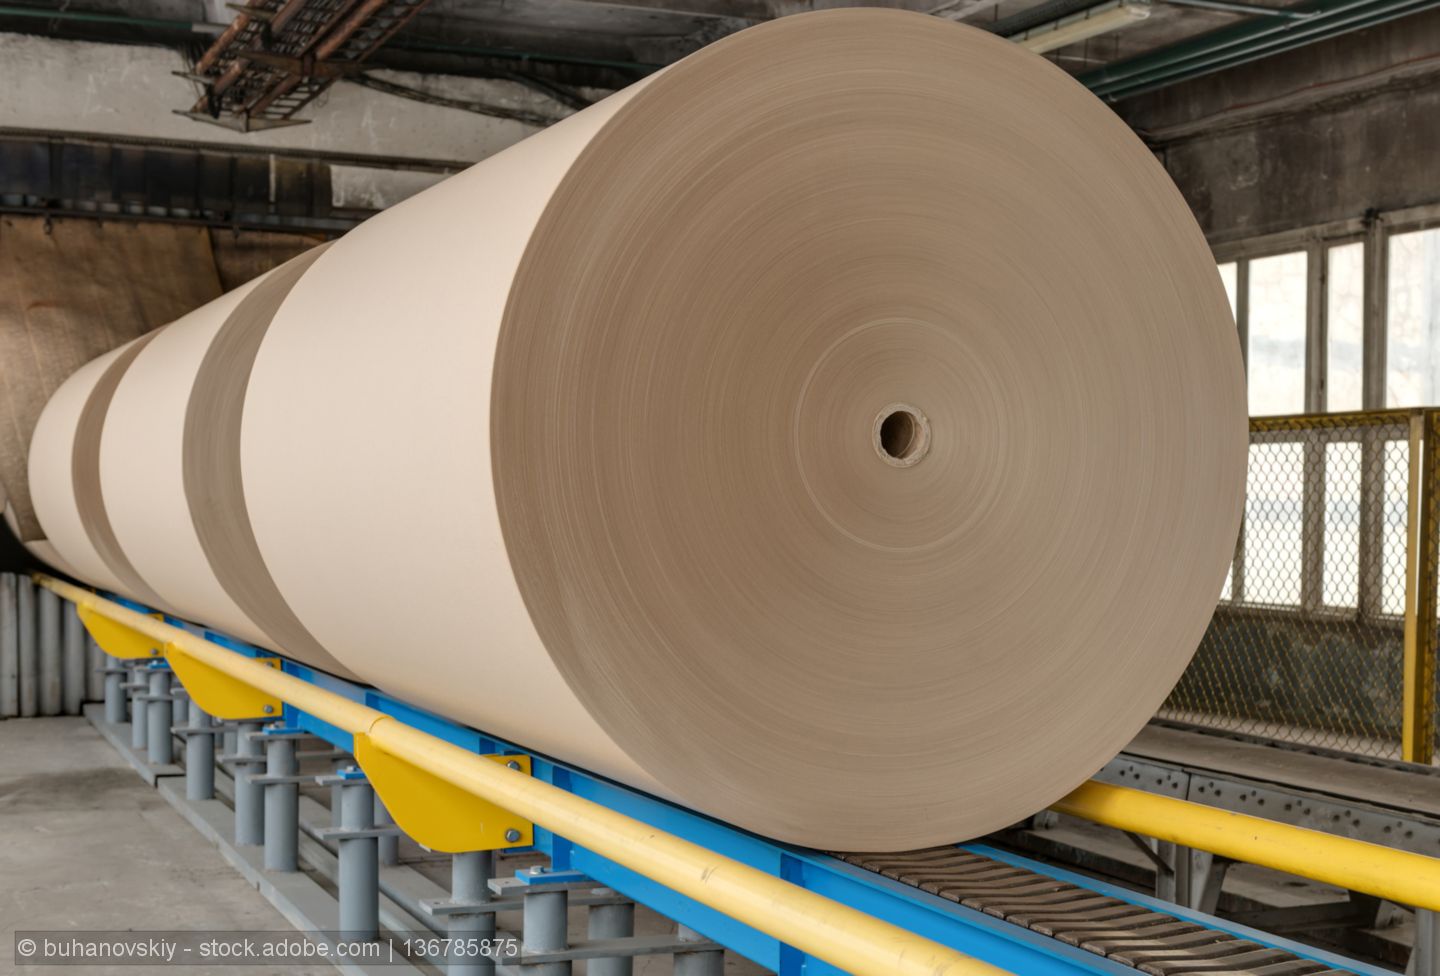 Pro-Gest to fire up Mantua packaging paper mill in September